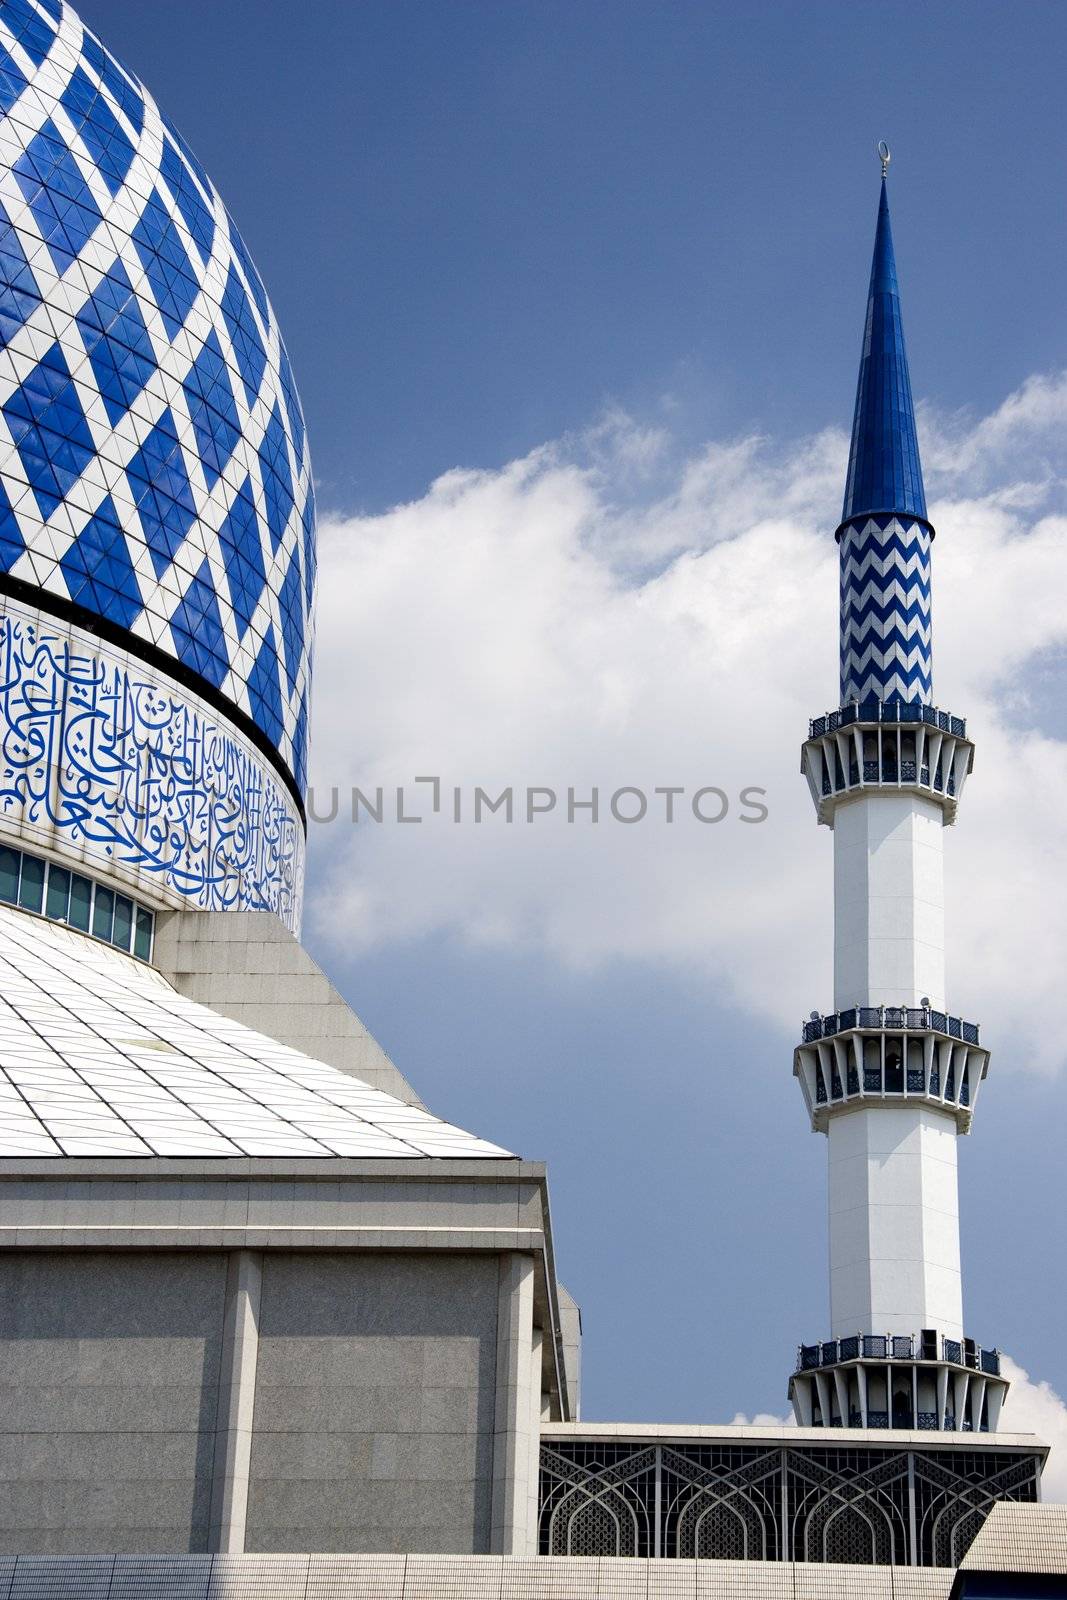 Sultan Salahuddin Abdul Aziz Shah Mosque or commonly known as the Blue Mosque, located at Shah Alam, Selangor, Malaysia. 